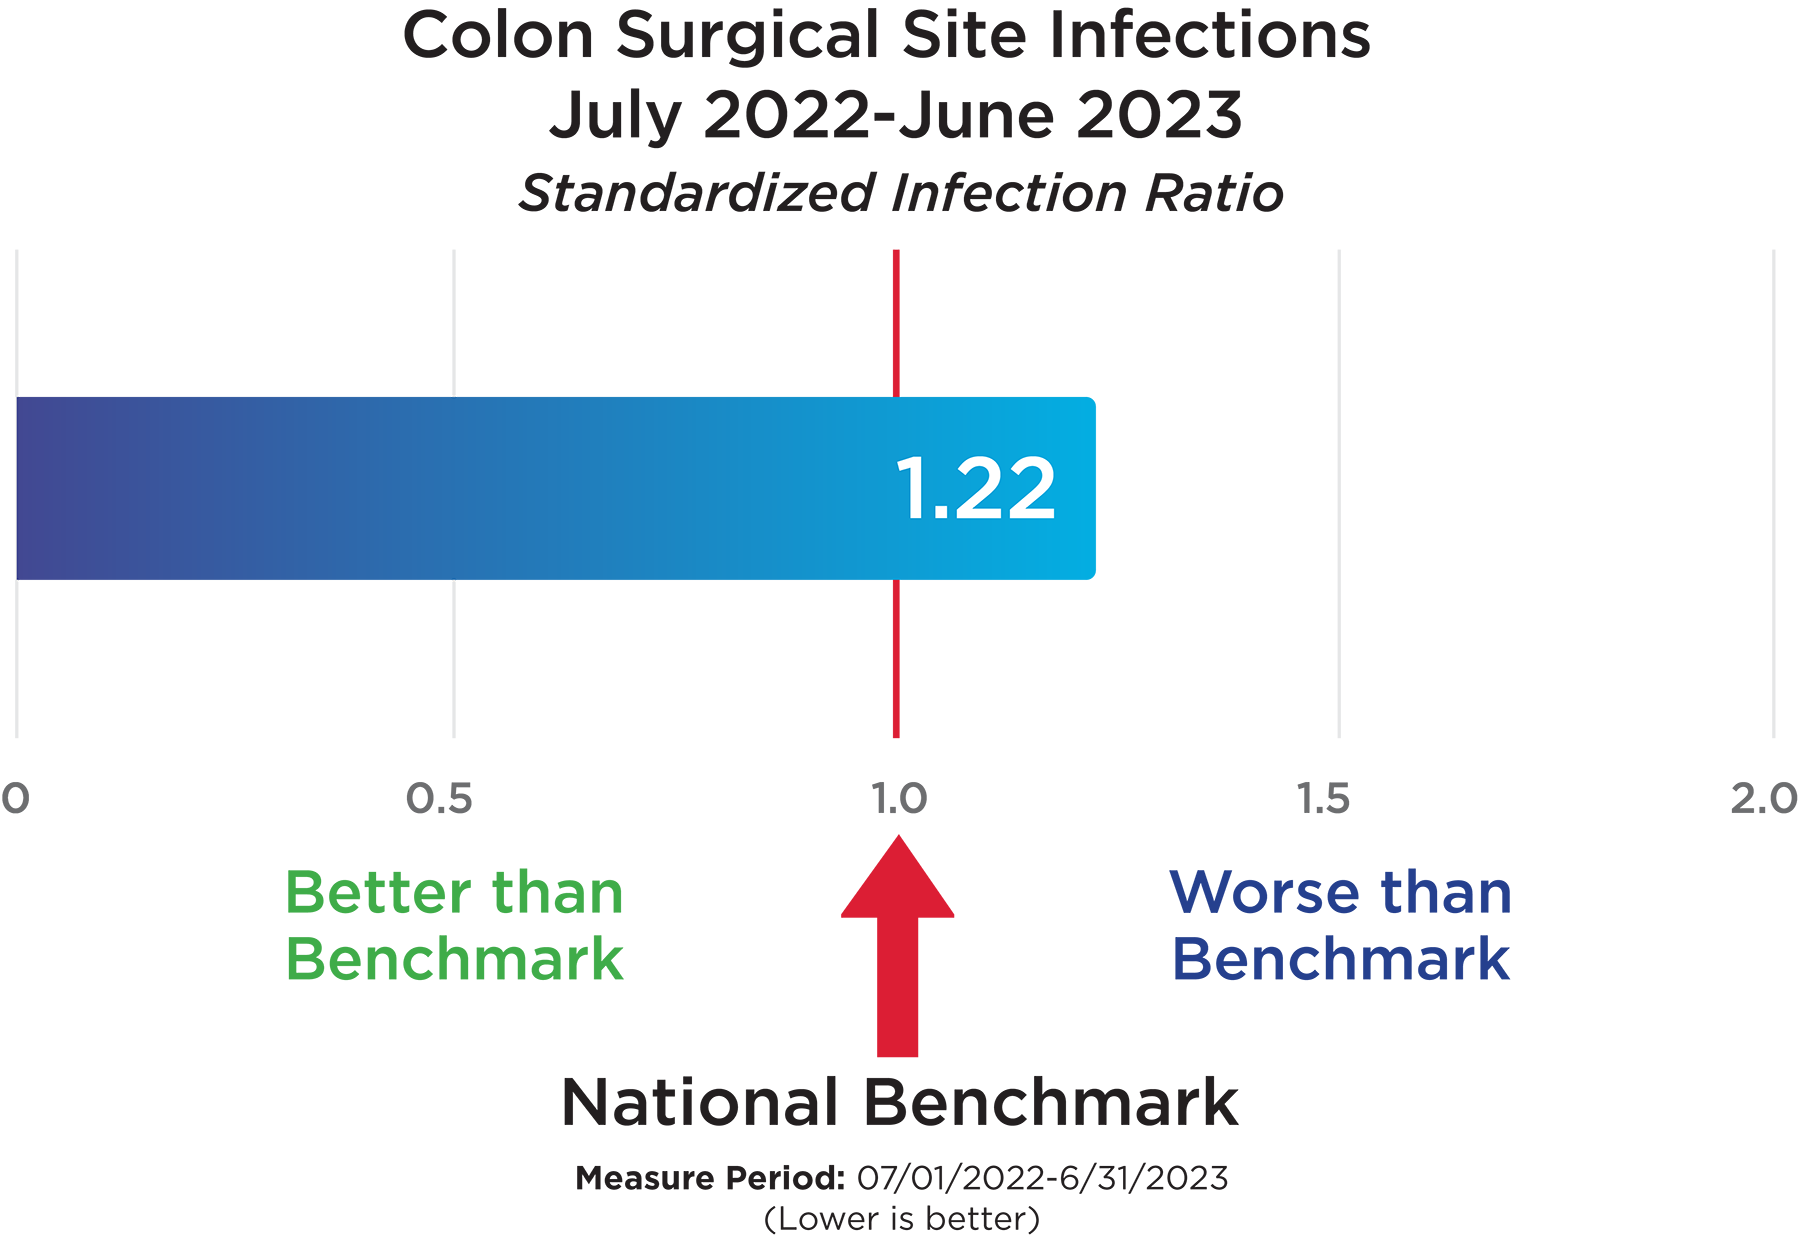 Colon Surgical Site Infections, July 2022 - June 2023